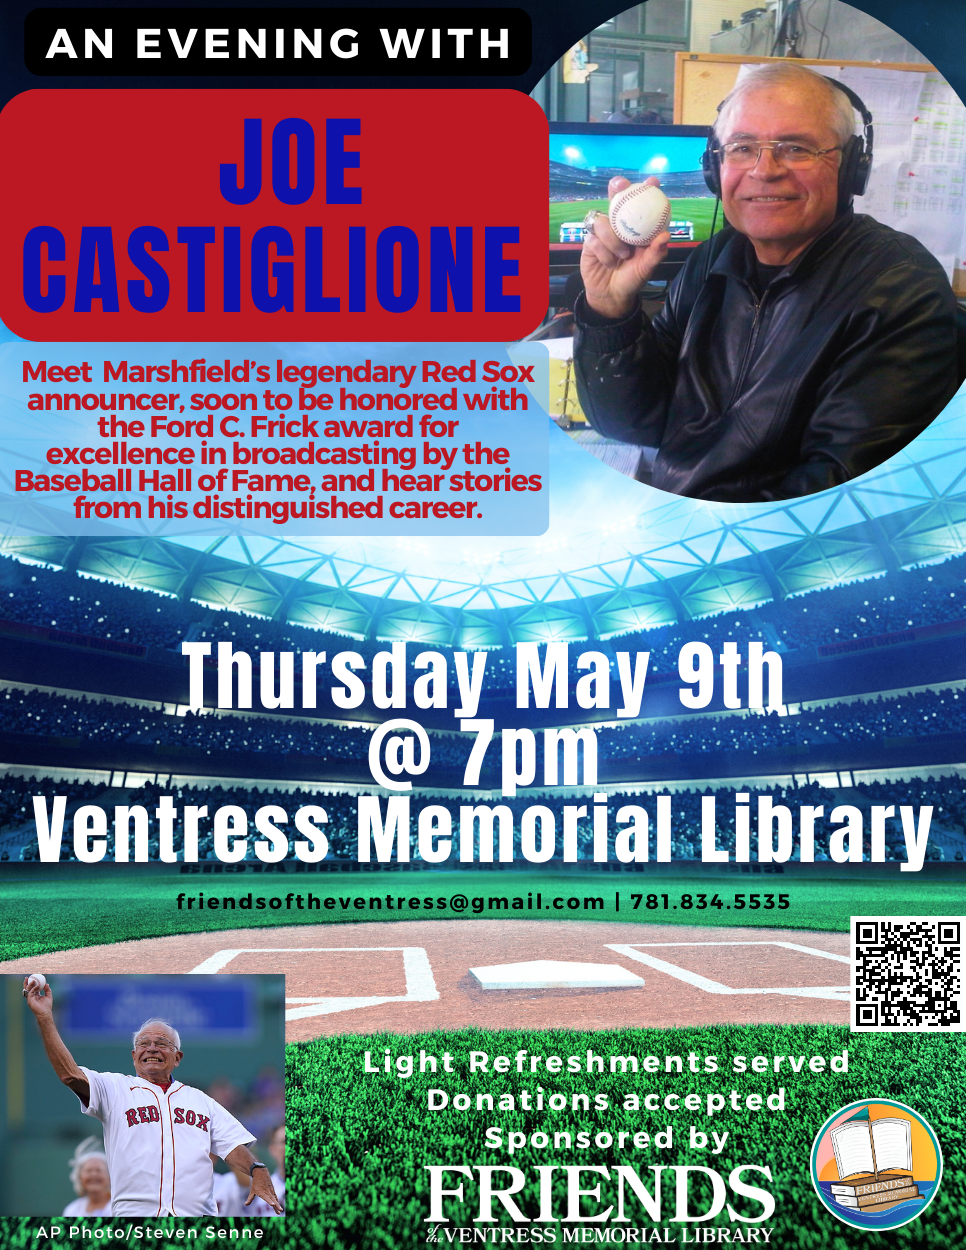 An evening with Joe Castiglione. Meet Marshfield's legendary Red Sox announcer, soon to be honored with the Ford C. Frick award for excellence in broadcasting by the Baseball Hall of Fame, and hear stories from his distinguished career.